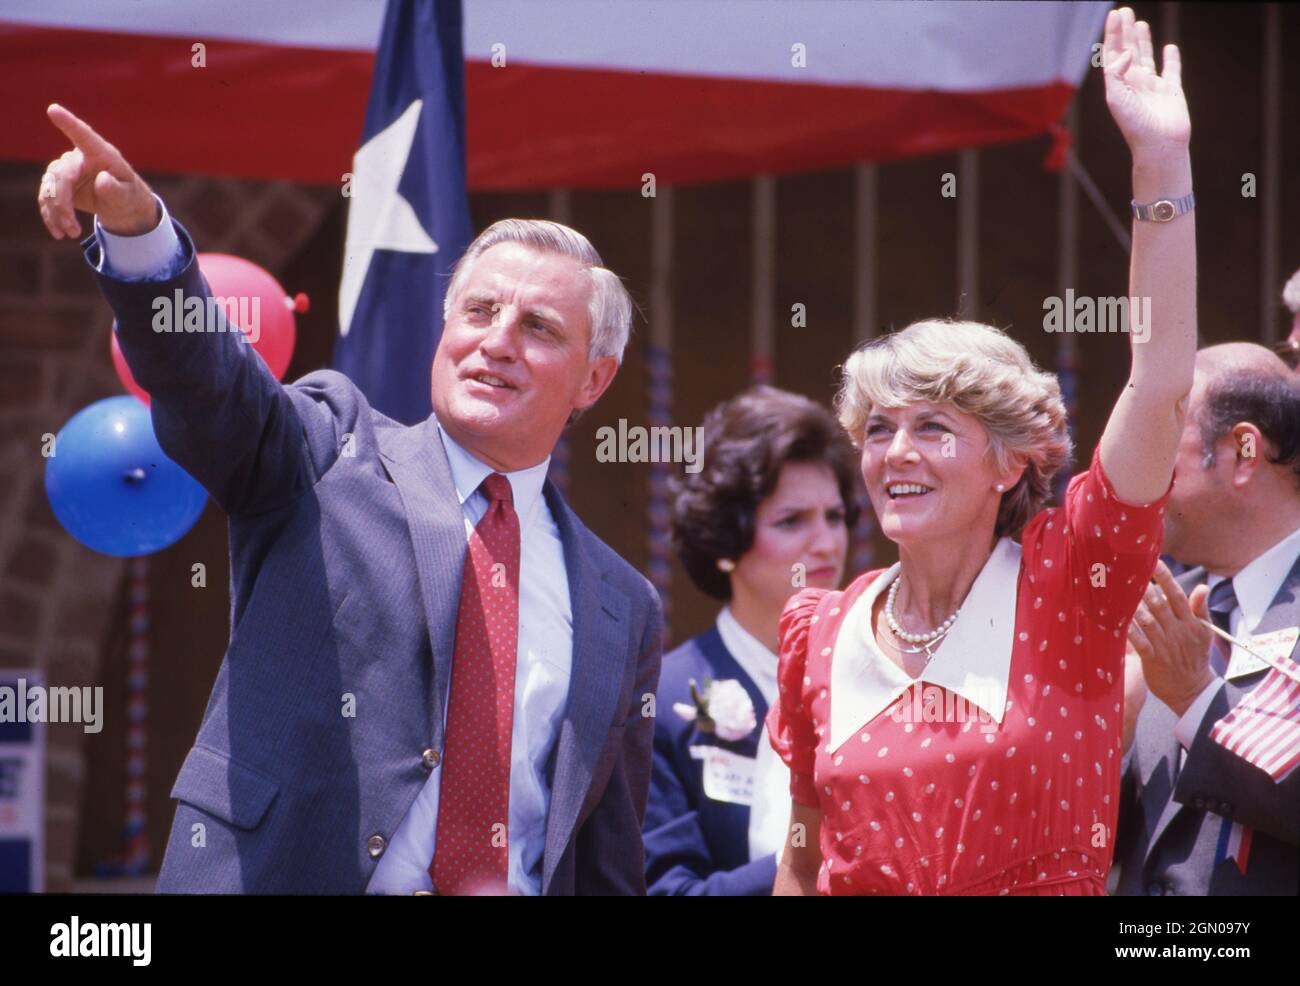 San Antonio Texas USA, 1984: Democratic vice presidential candidate Geraldine Ferraro, wave to supporters during a campaign rally at Market Square. Ferraro is the first woman nominated as vice president of a major party in American politics.  ©Bob Daemmrich Stock Photo